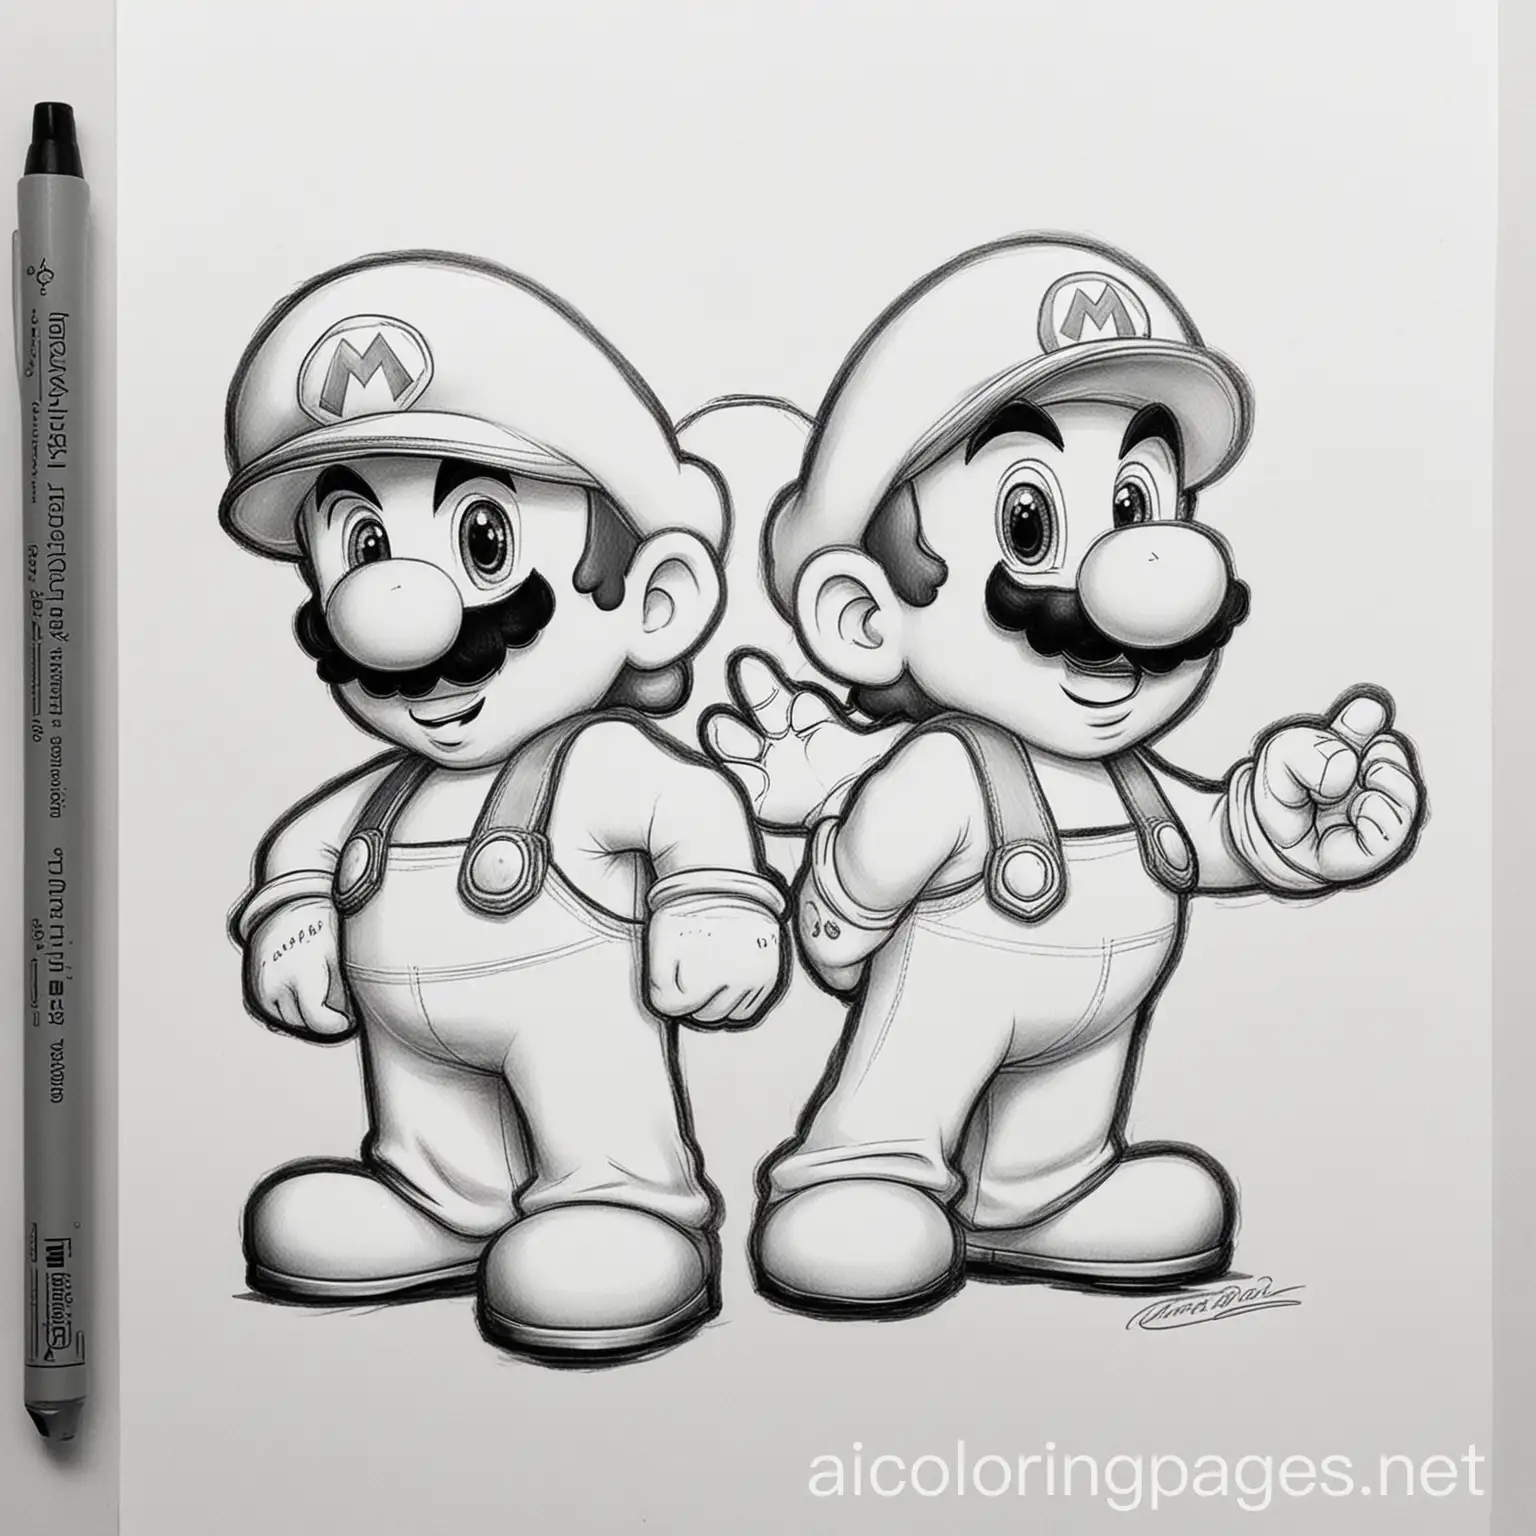 mario and lugi, Coloring Page, black and white, line art, white background, Simplicity, Ample White Space. The background of the coloring page is plain white to make it easy for young children to color within the lines. The outlines of all the subjects are easy to distinguish, making it simple for kids to color without too much difficulty